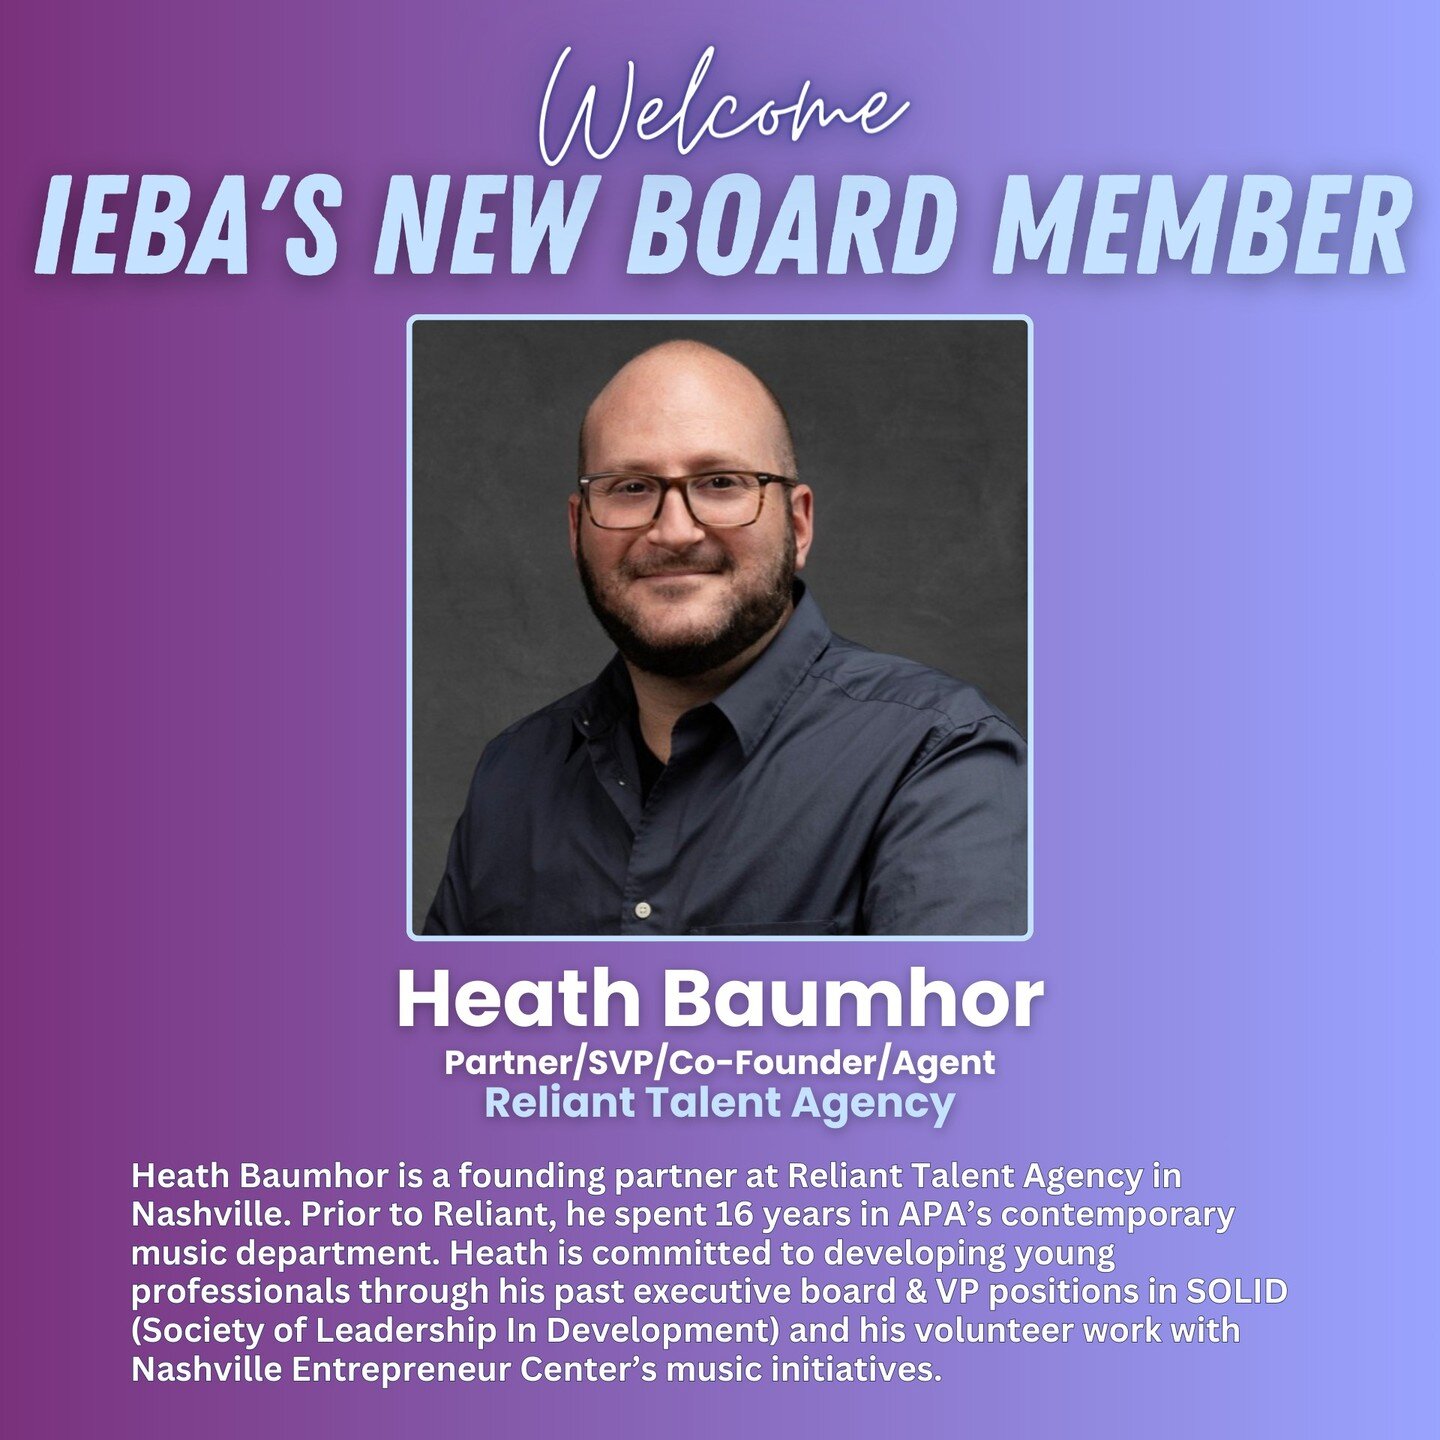 Welcome IEBA's New Board Member!

Heath Baumhor
Partner/SVP/Co-Founder/Agent
Reliant Talent Agency